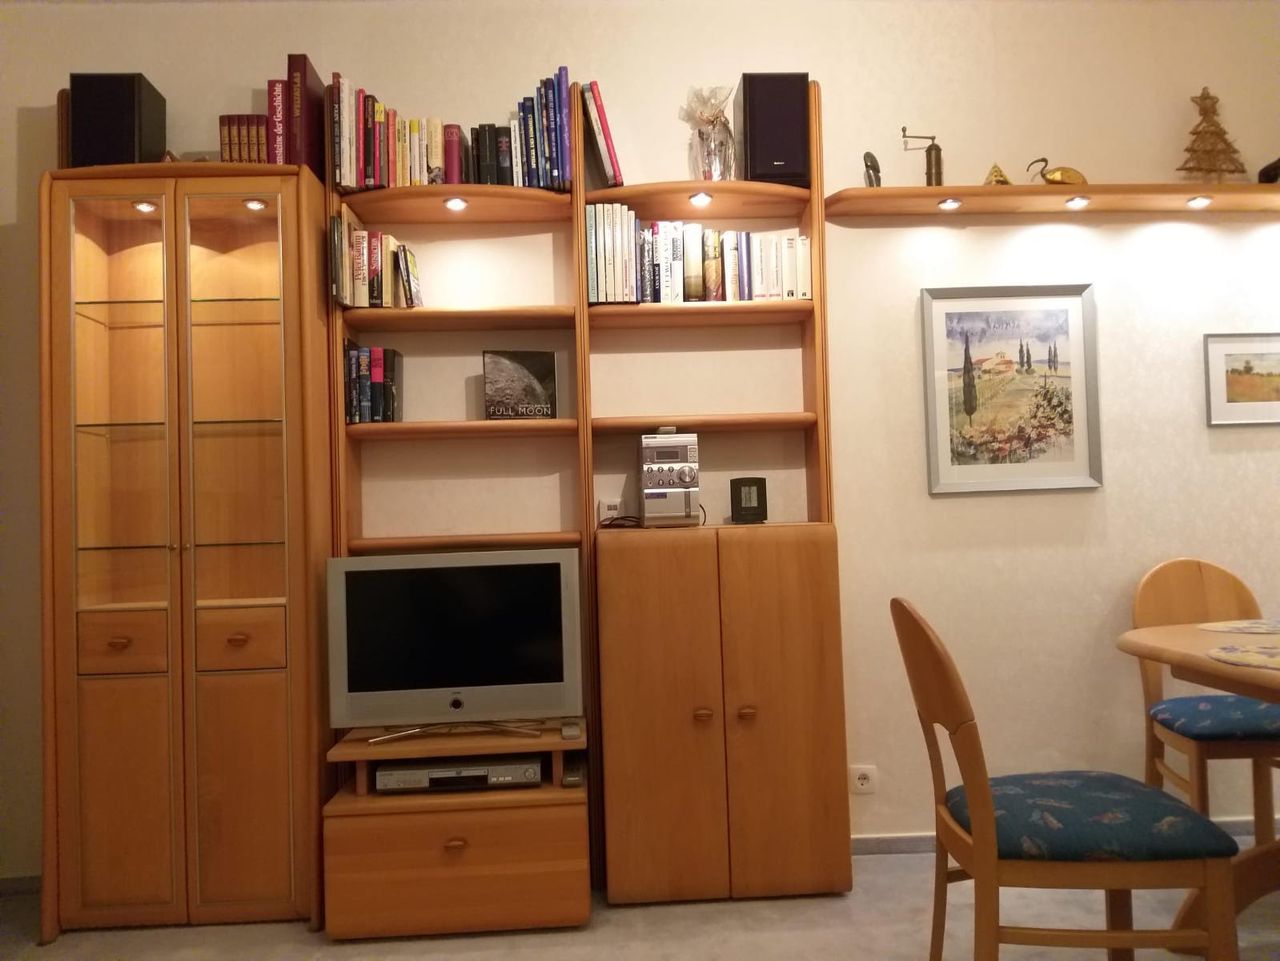 Lovely apartment in a hip neighborhood full of cafes and bars - 1 min from Train station.  Fully furnished.